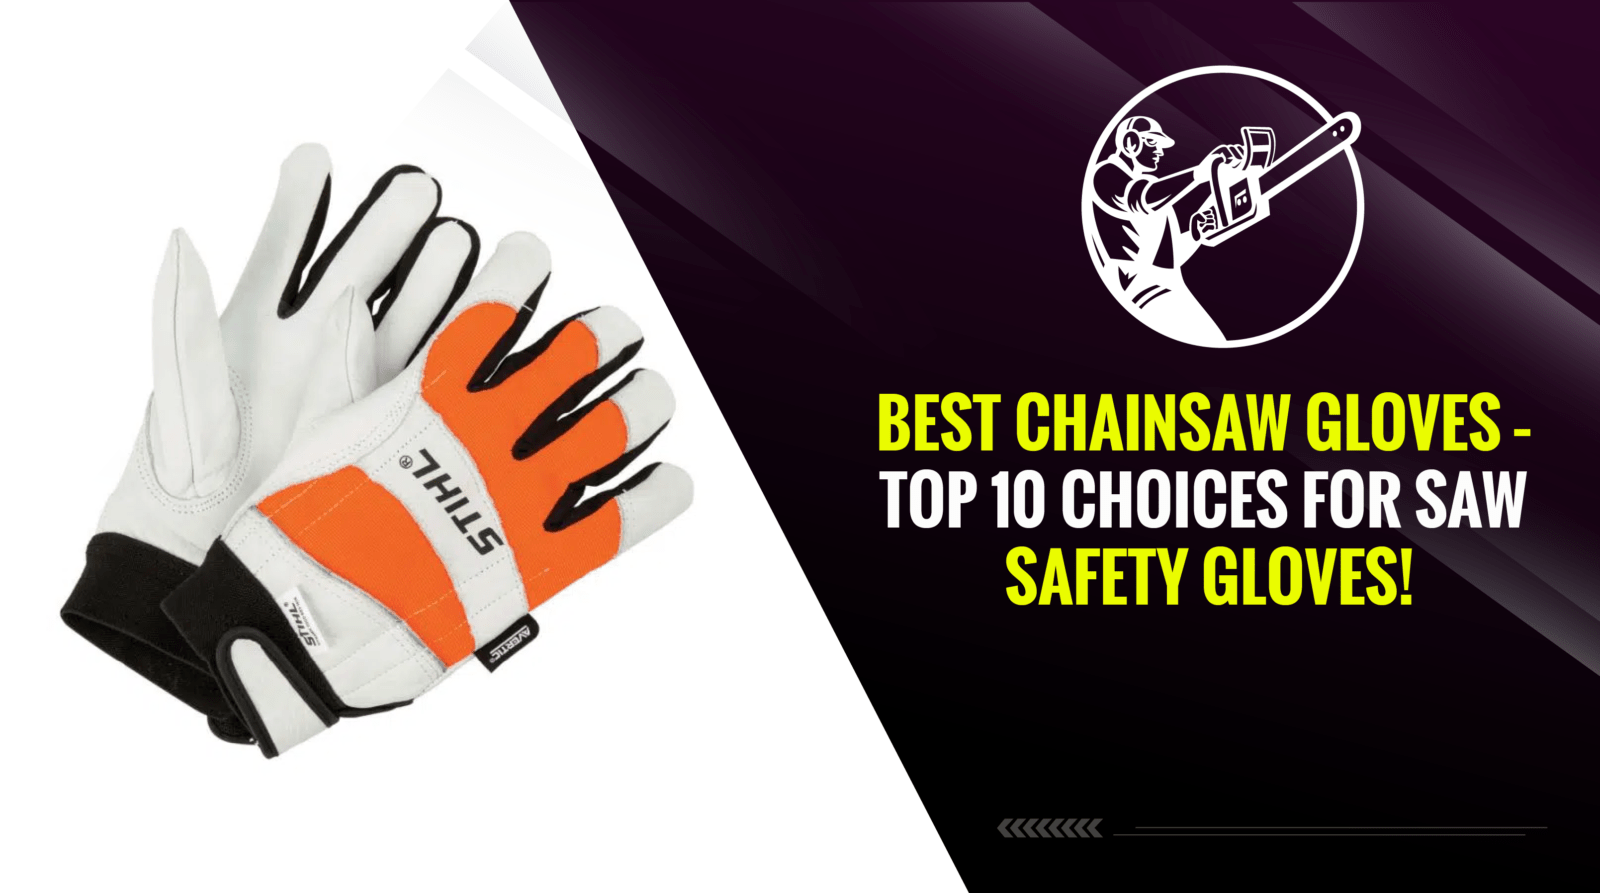 Best Chainsaw Gloves – Top 10 Choices for Saw Safety Gloves!